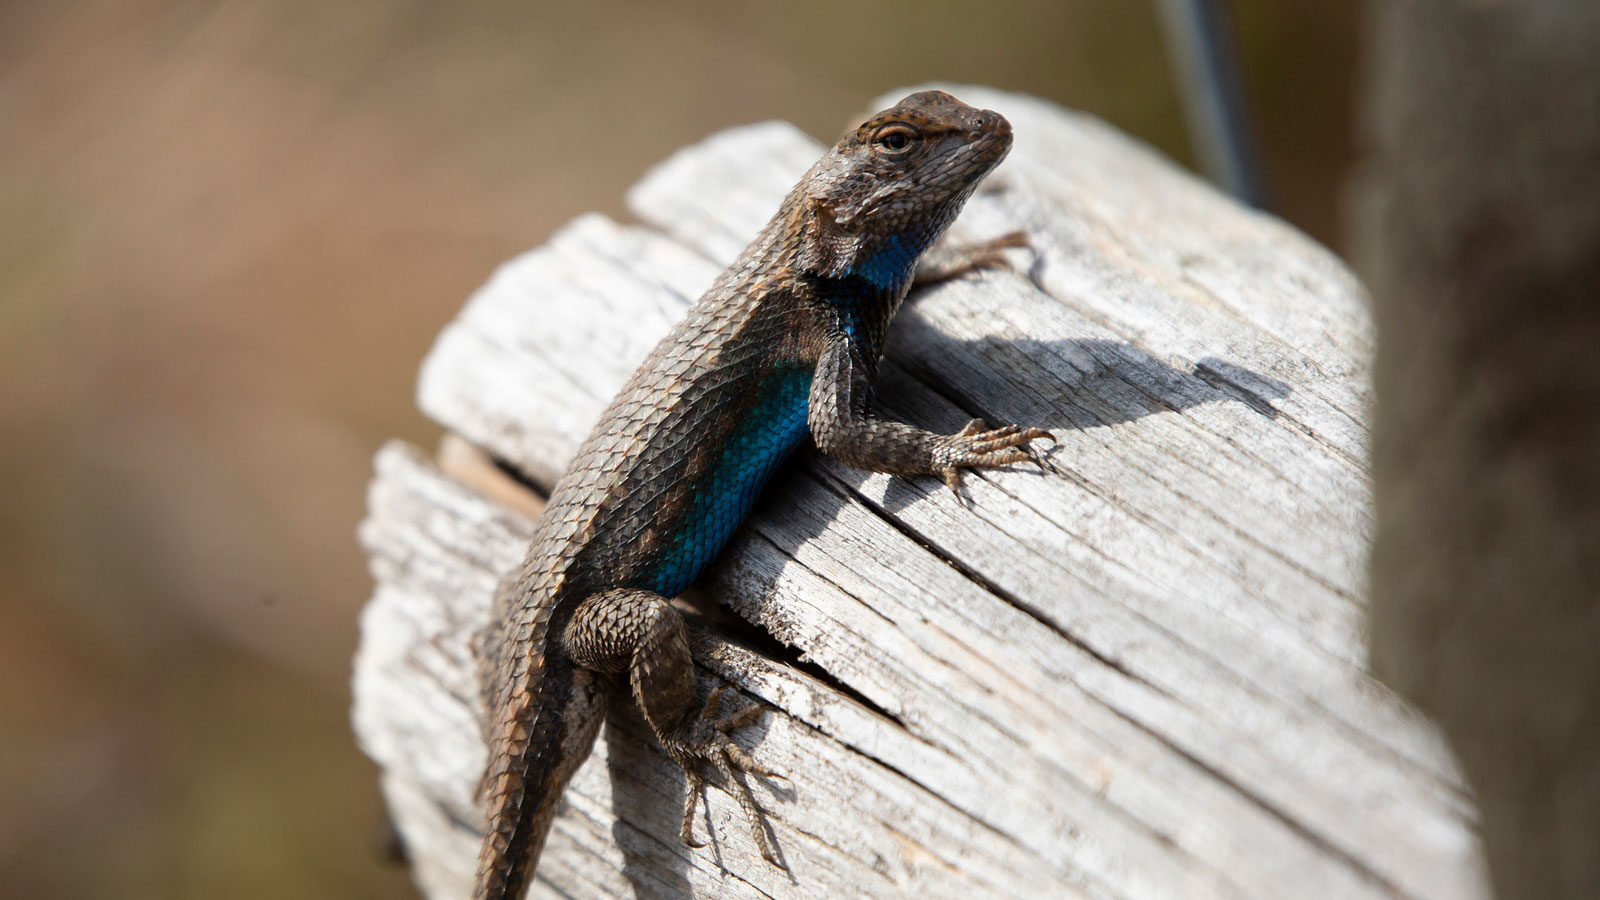 Large male eastern fence lizard looking around from his perch on a wooden plank